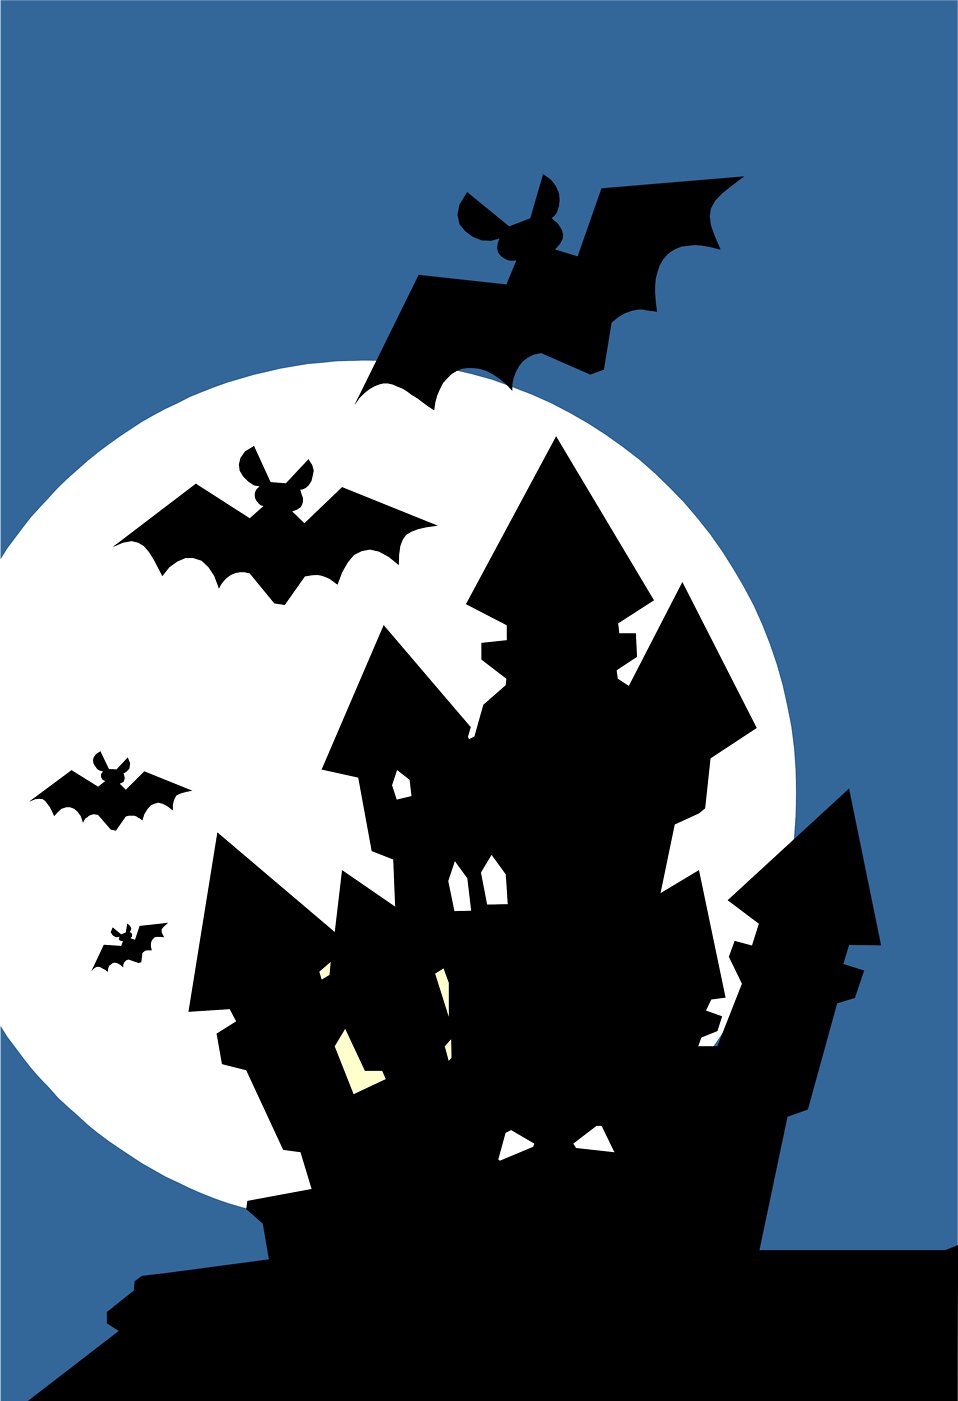 Haunted House Silhouette Vector Images  Pictures - Becuo